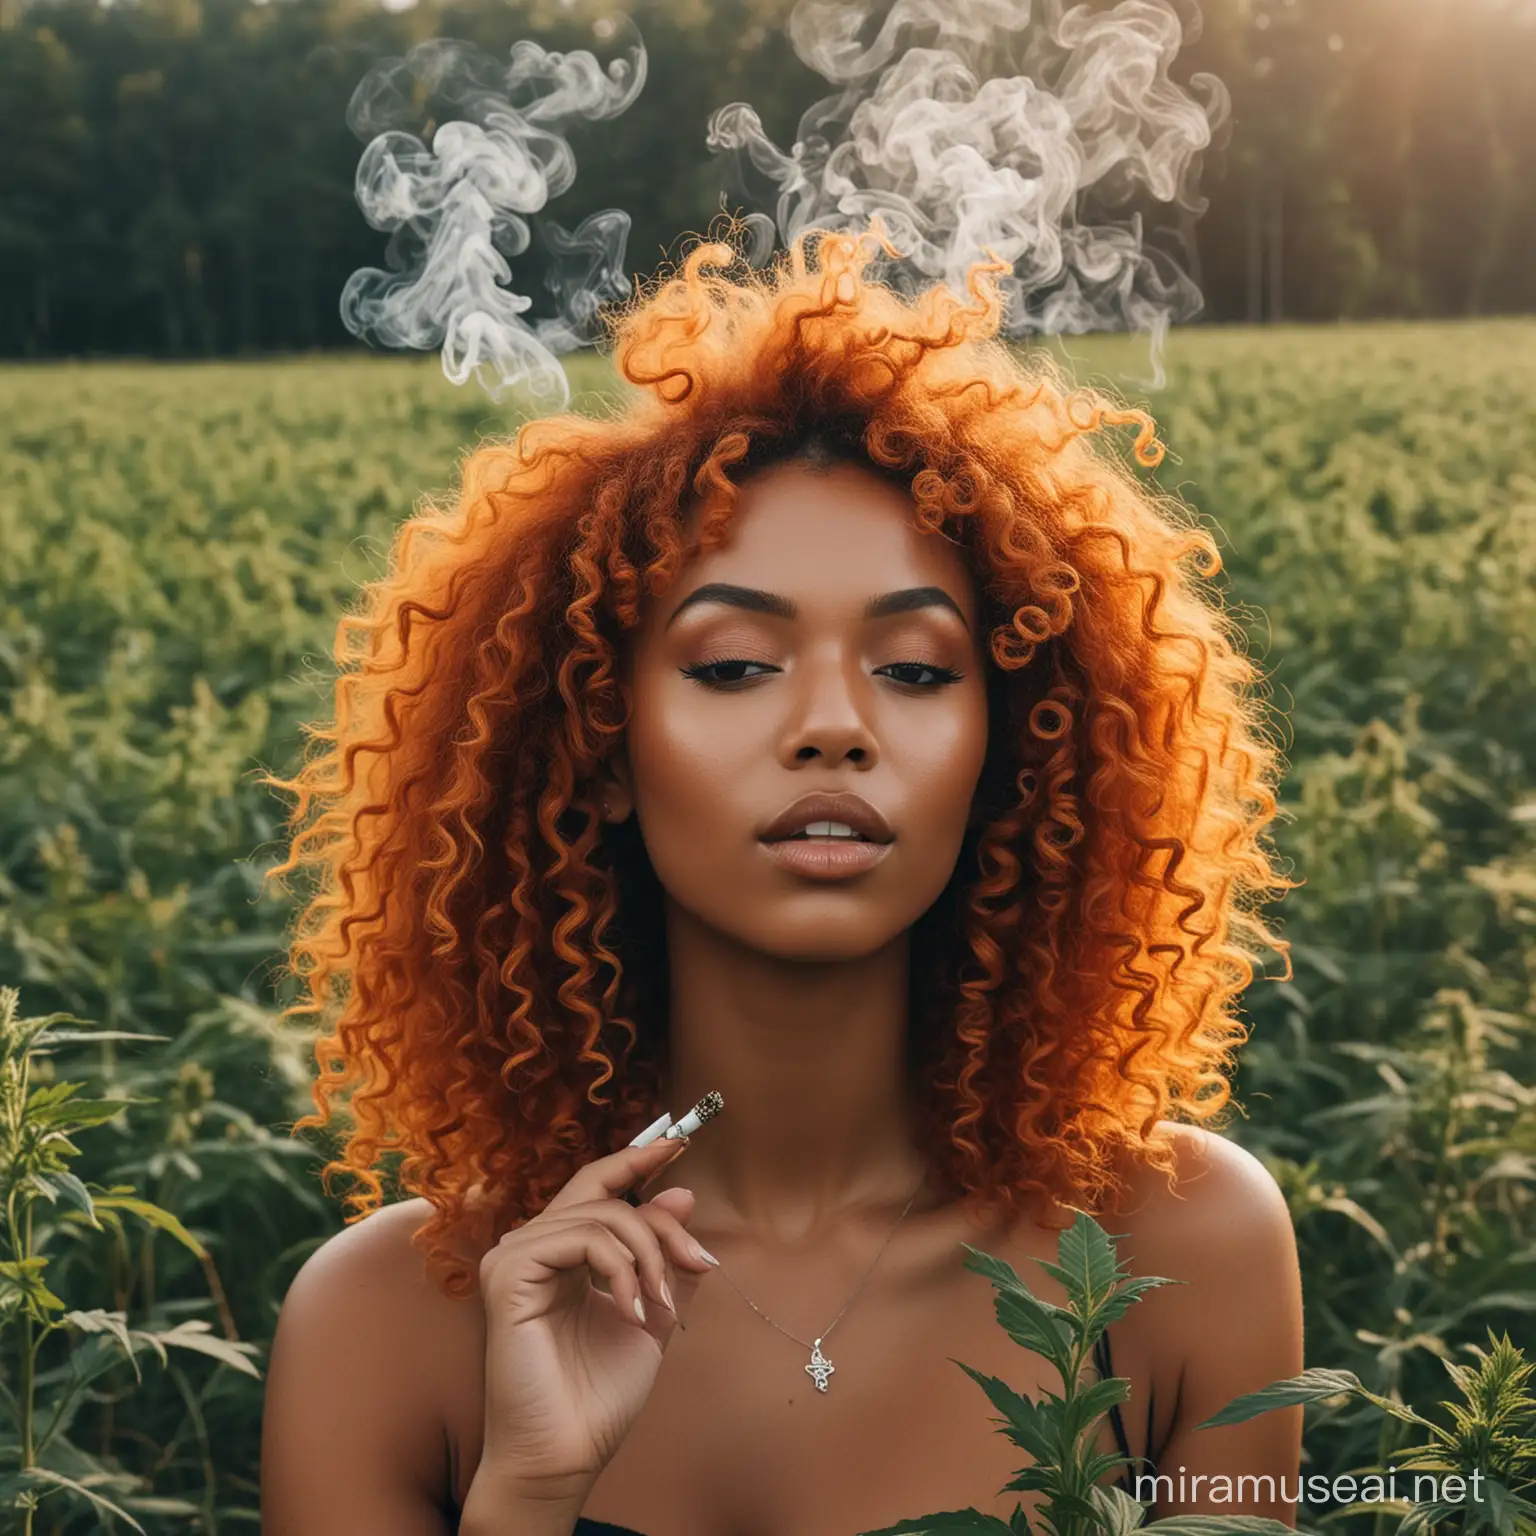 Sexy Black dark skin Woman with a bright ginger colored curl hairstyle smoking a joint in a field of cannabis, There is smoke around her.

